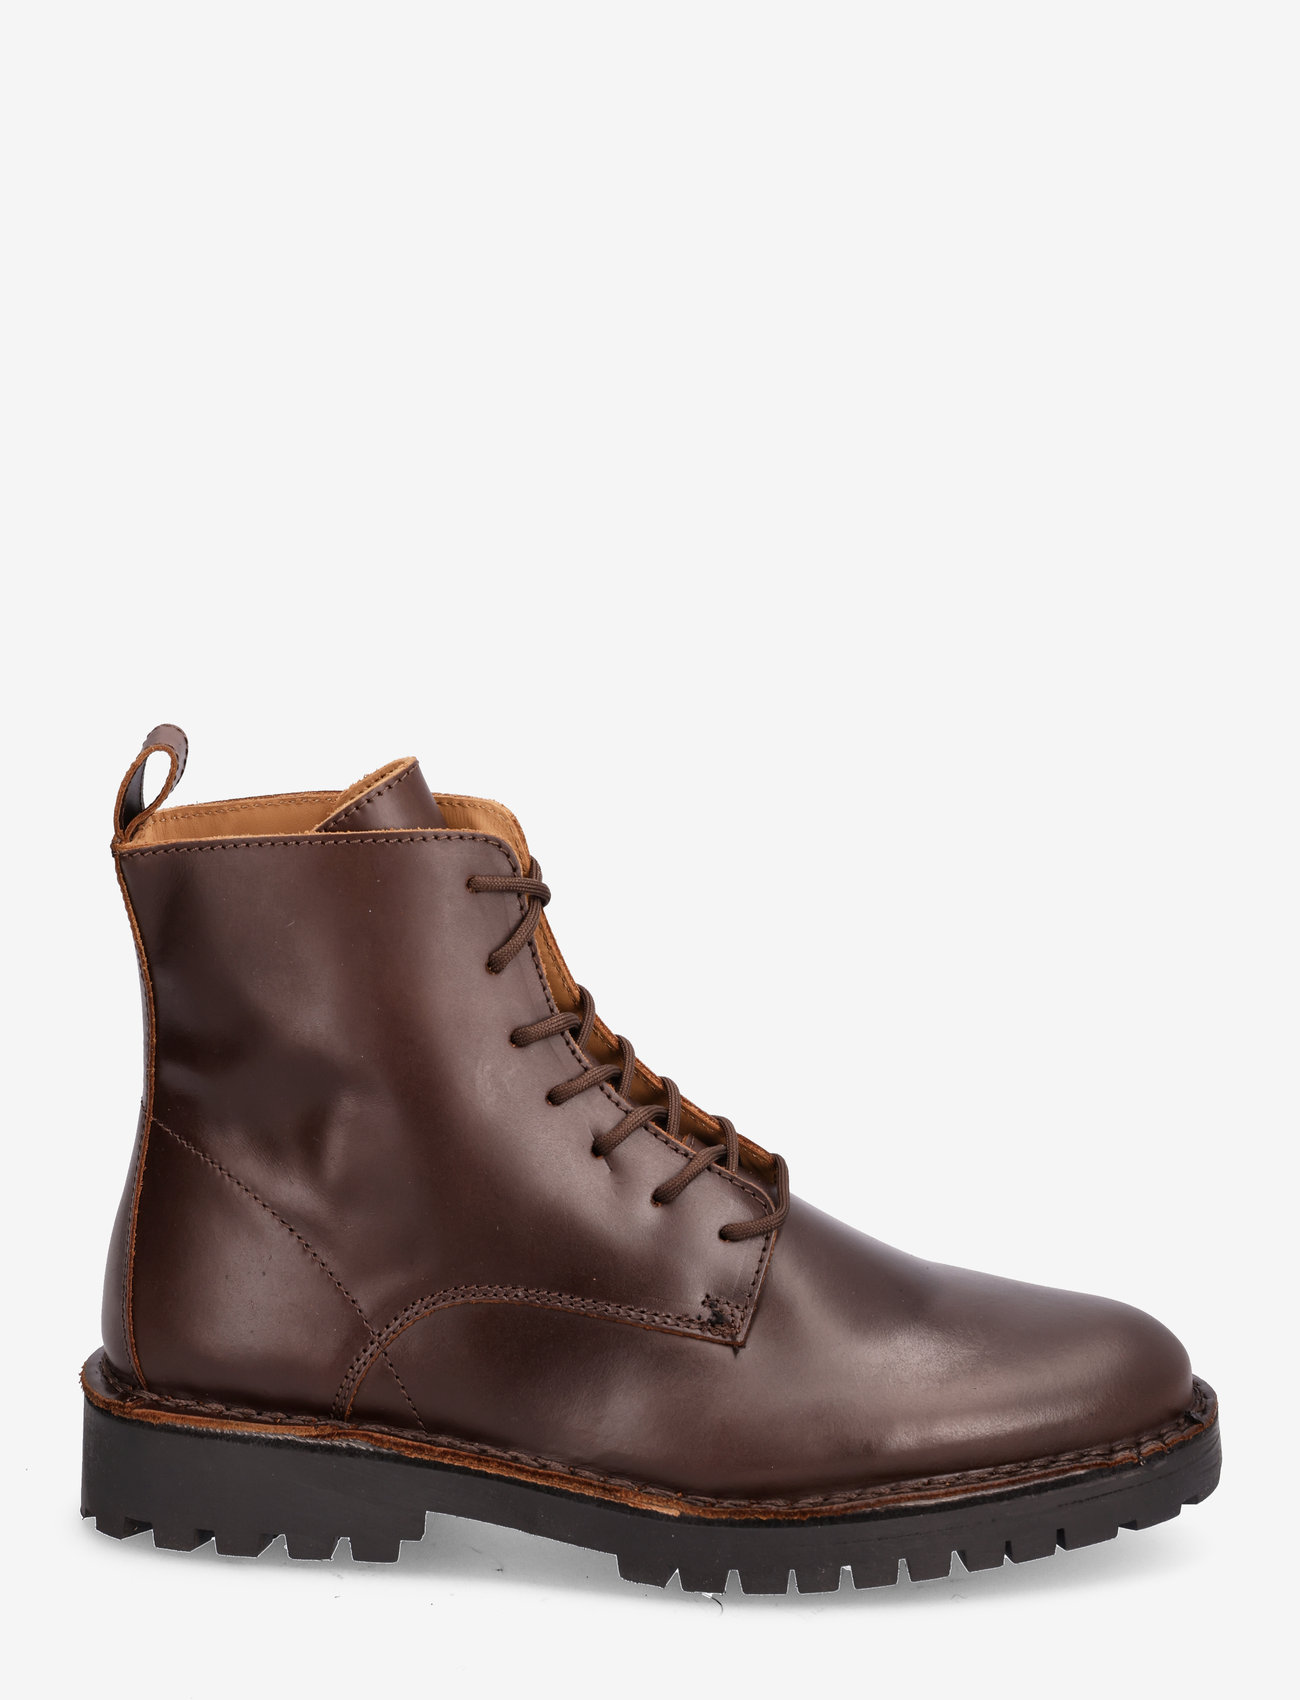 Selected Homme - SLHRICKY LEATHER LACE-UP BOOT - veter schoenen - demitasse - 1